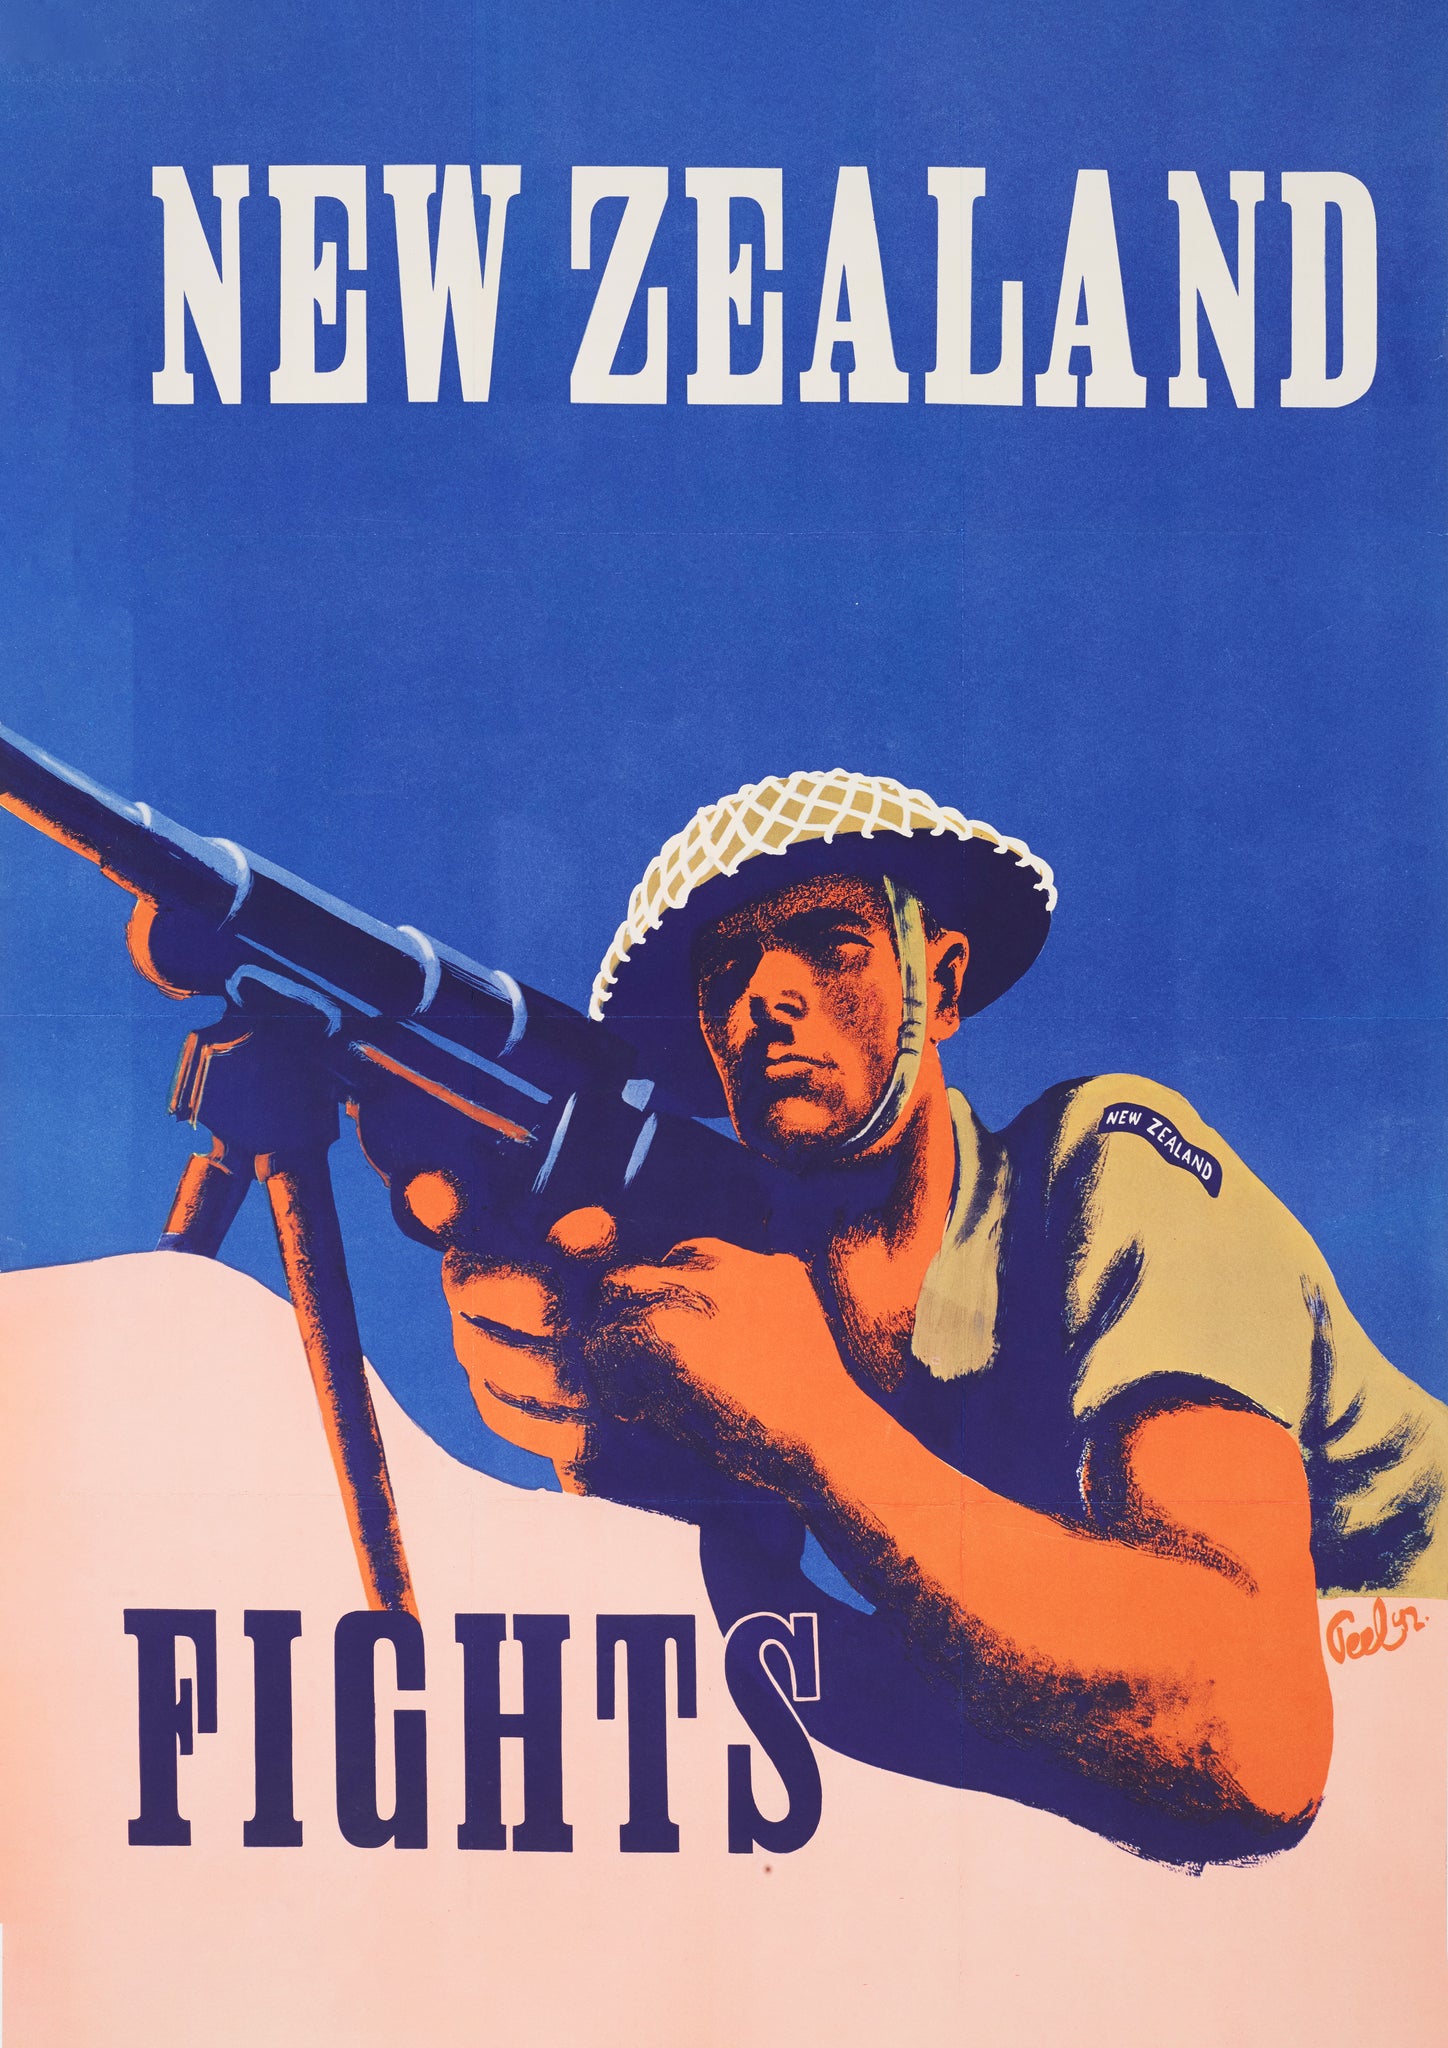 New Zealand Fights – World War Two poster